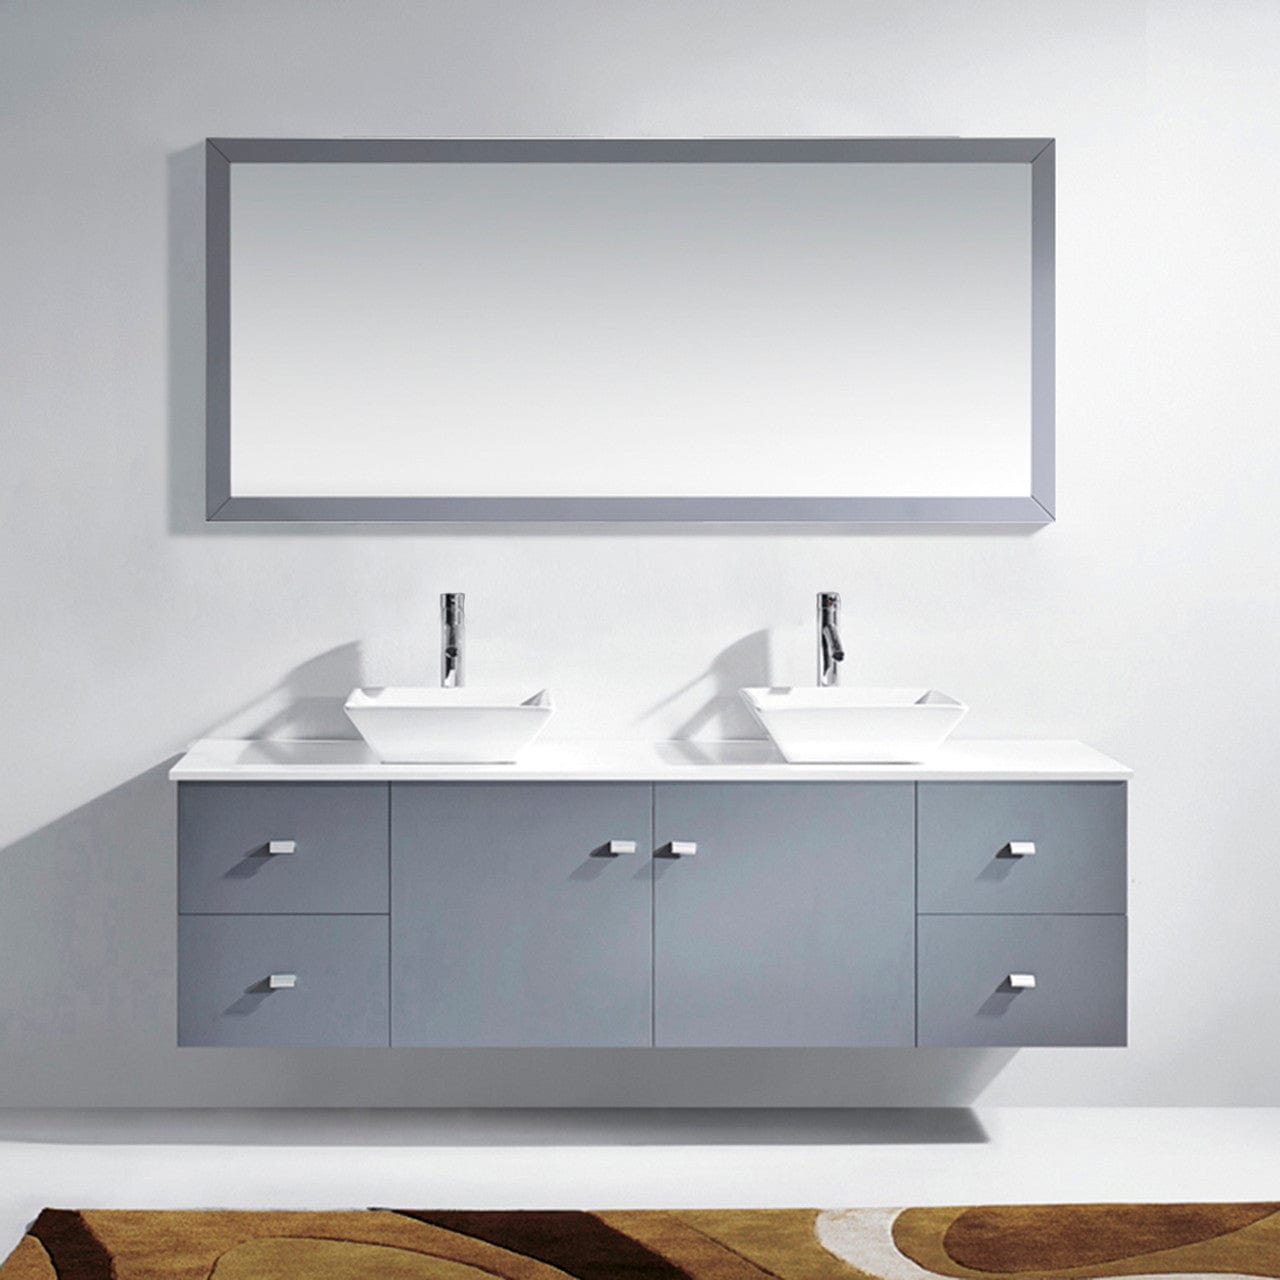  Virtu USA Clarissa 72 Double Bathroom Vanity Set in Grey w/ White Stone Counter-Top | Square Basin front view close up